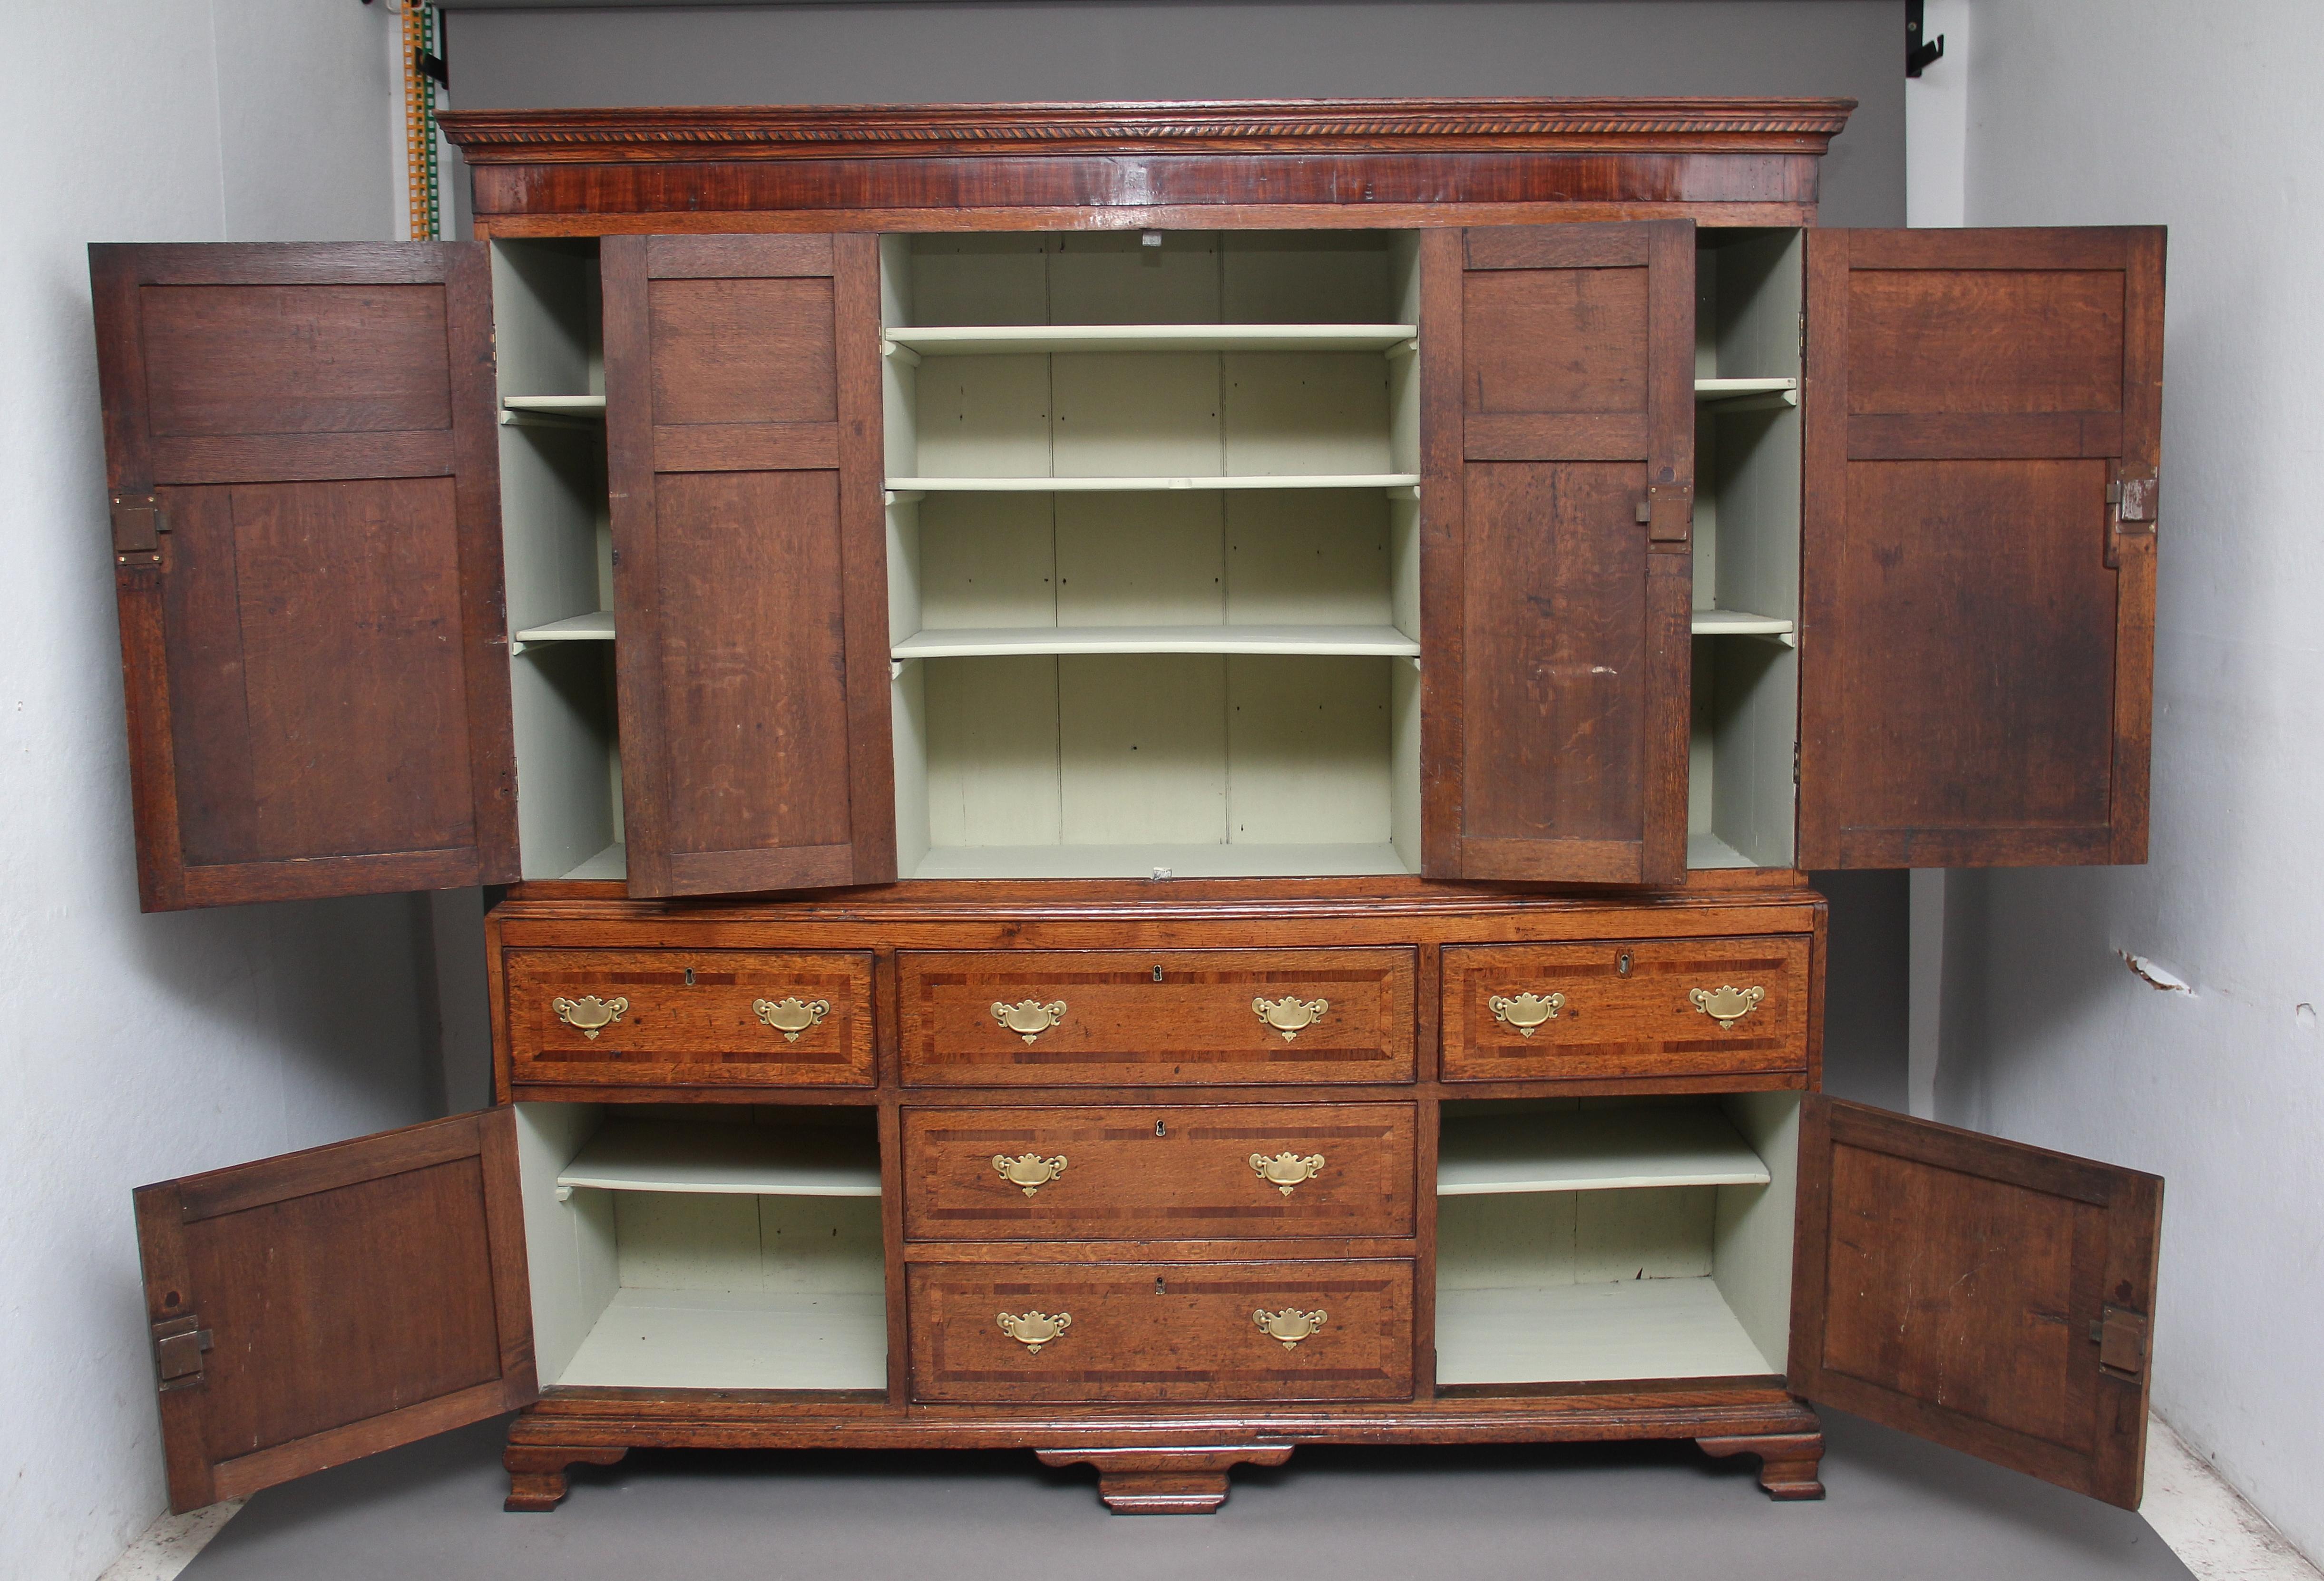 18th century oak housekeepers cupboard of good proportions, the cupboard is in two sections, the top section having a stepped moulded cornice above a four door cupboard, the door fronts having fielded panels with crossbanding, the two doors at the